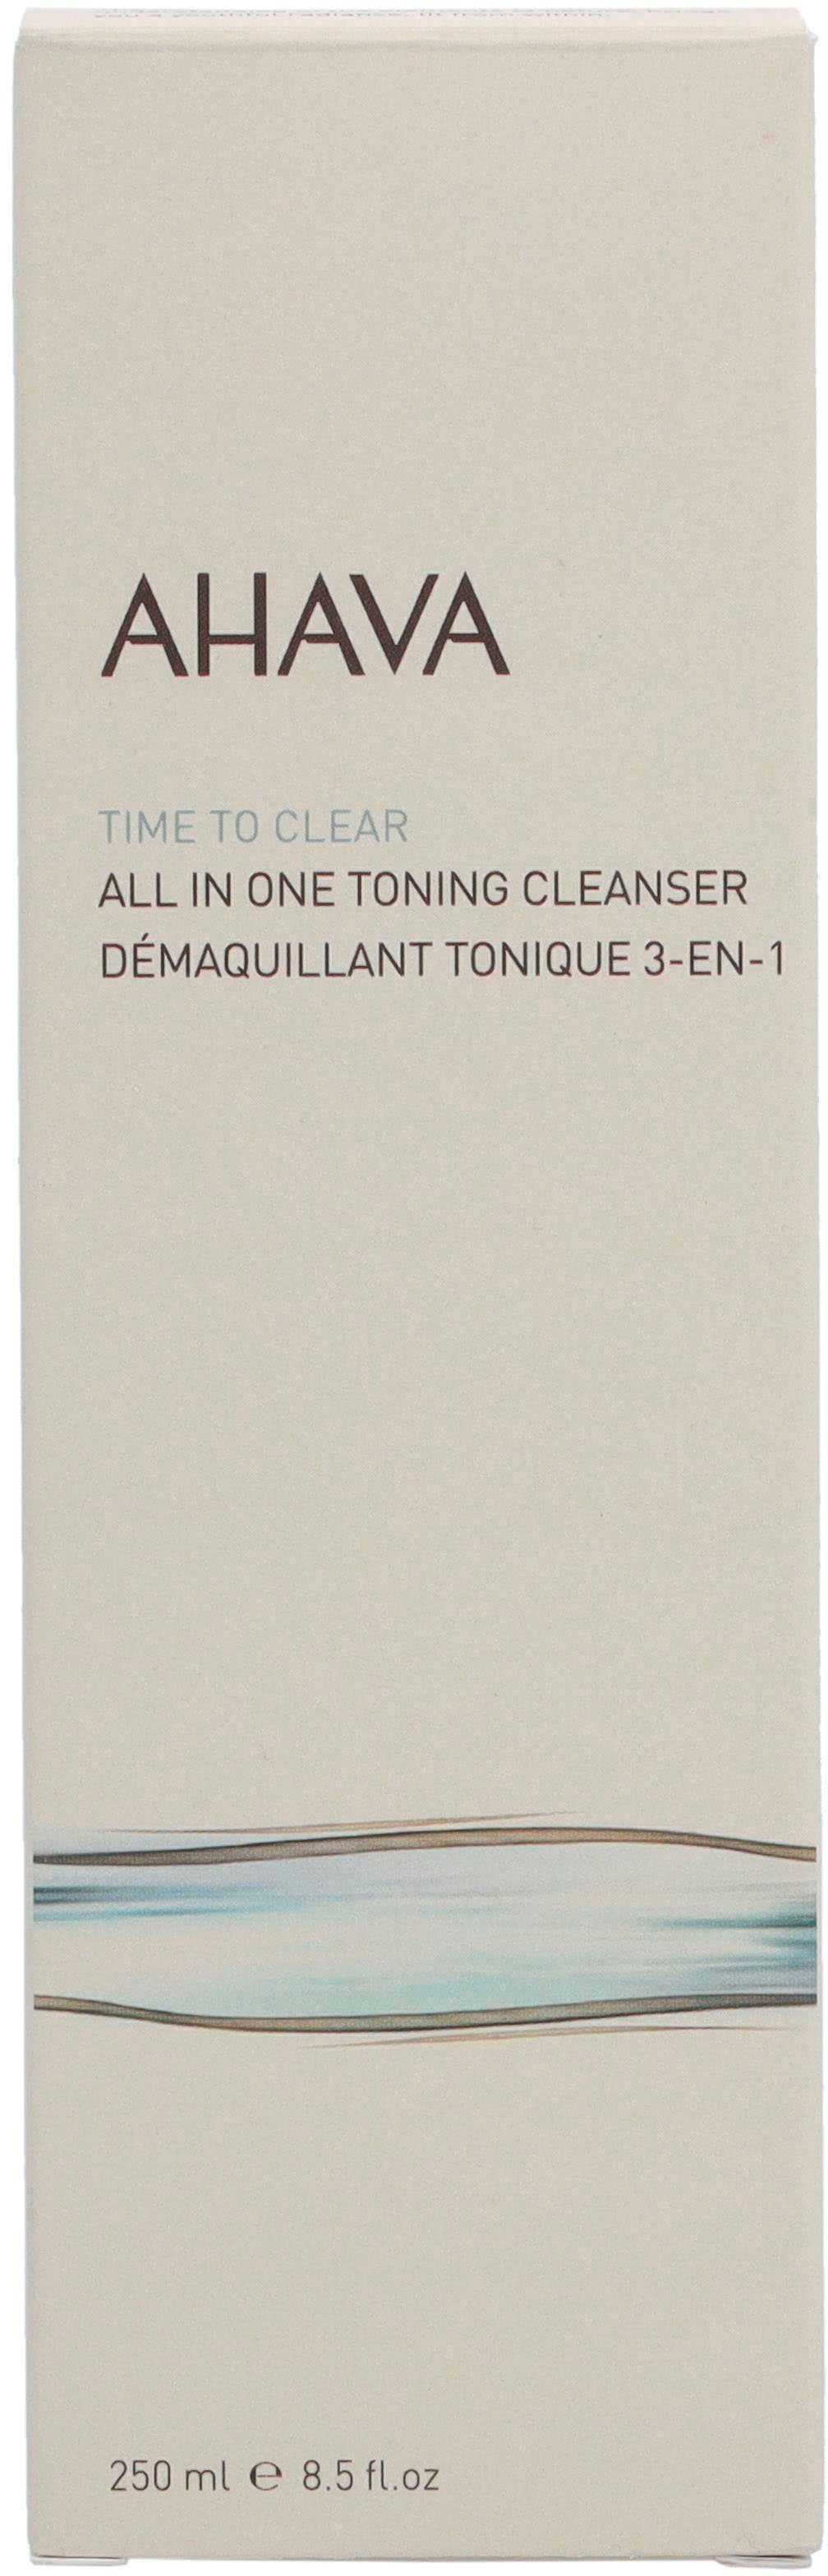 To One AHAVA All Cleanser Toning Gesichts-Reinigungslotion Clear Time In